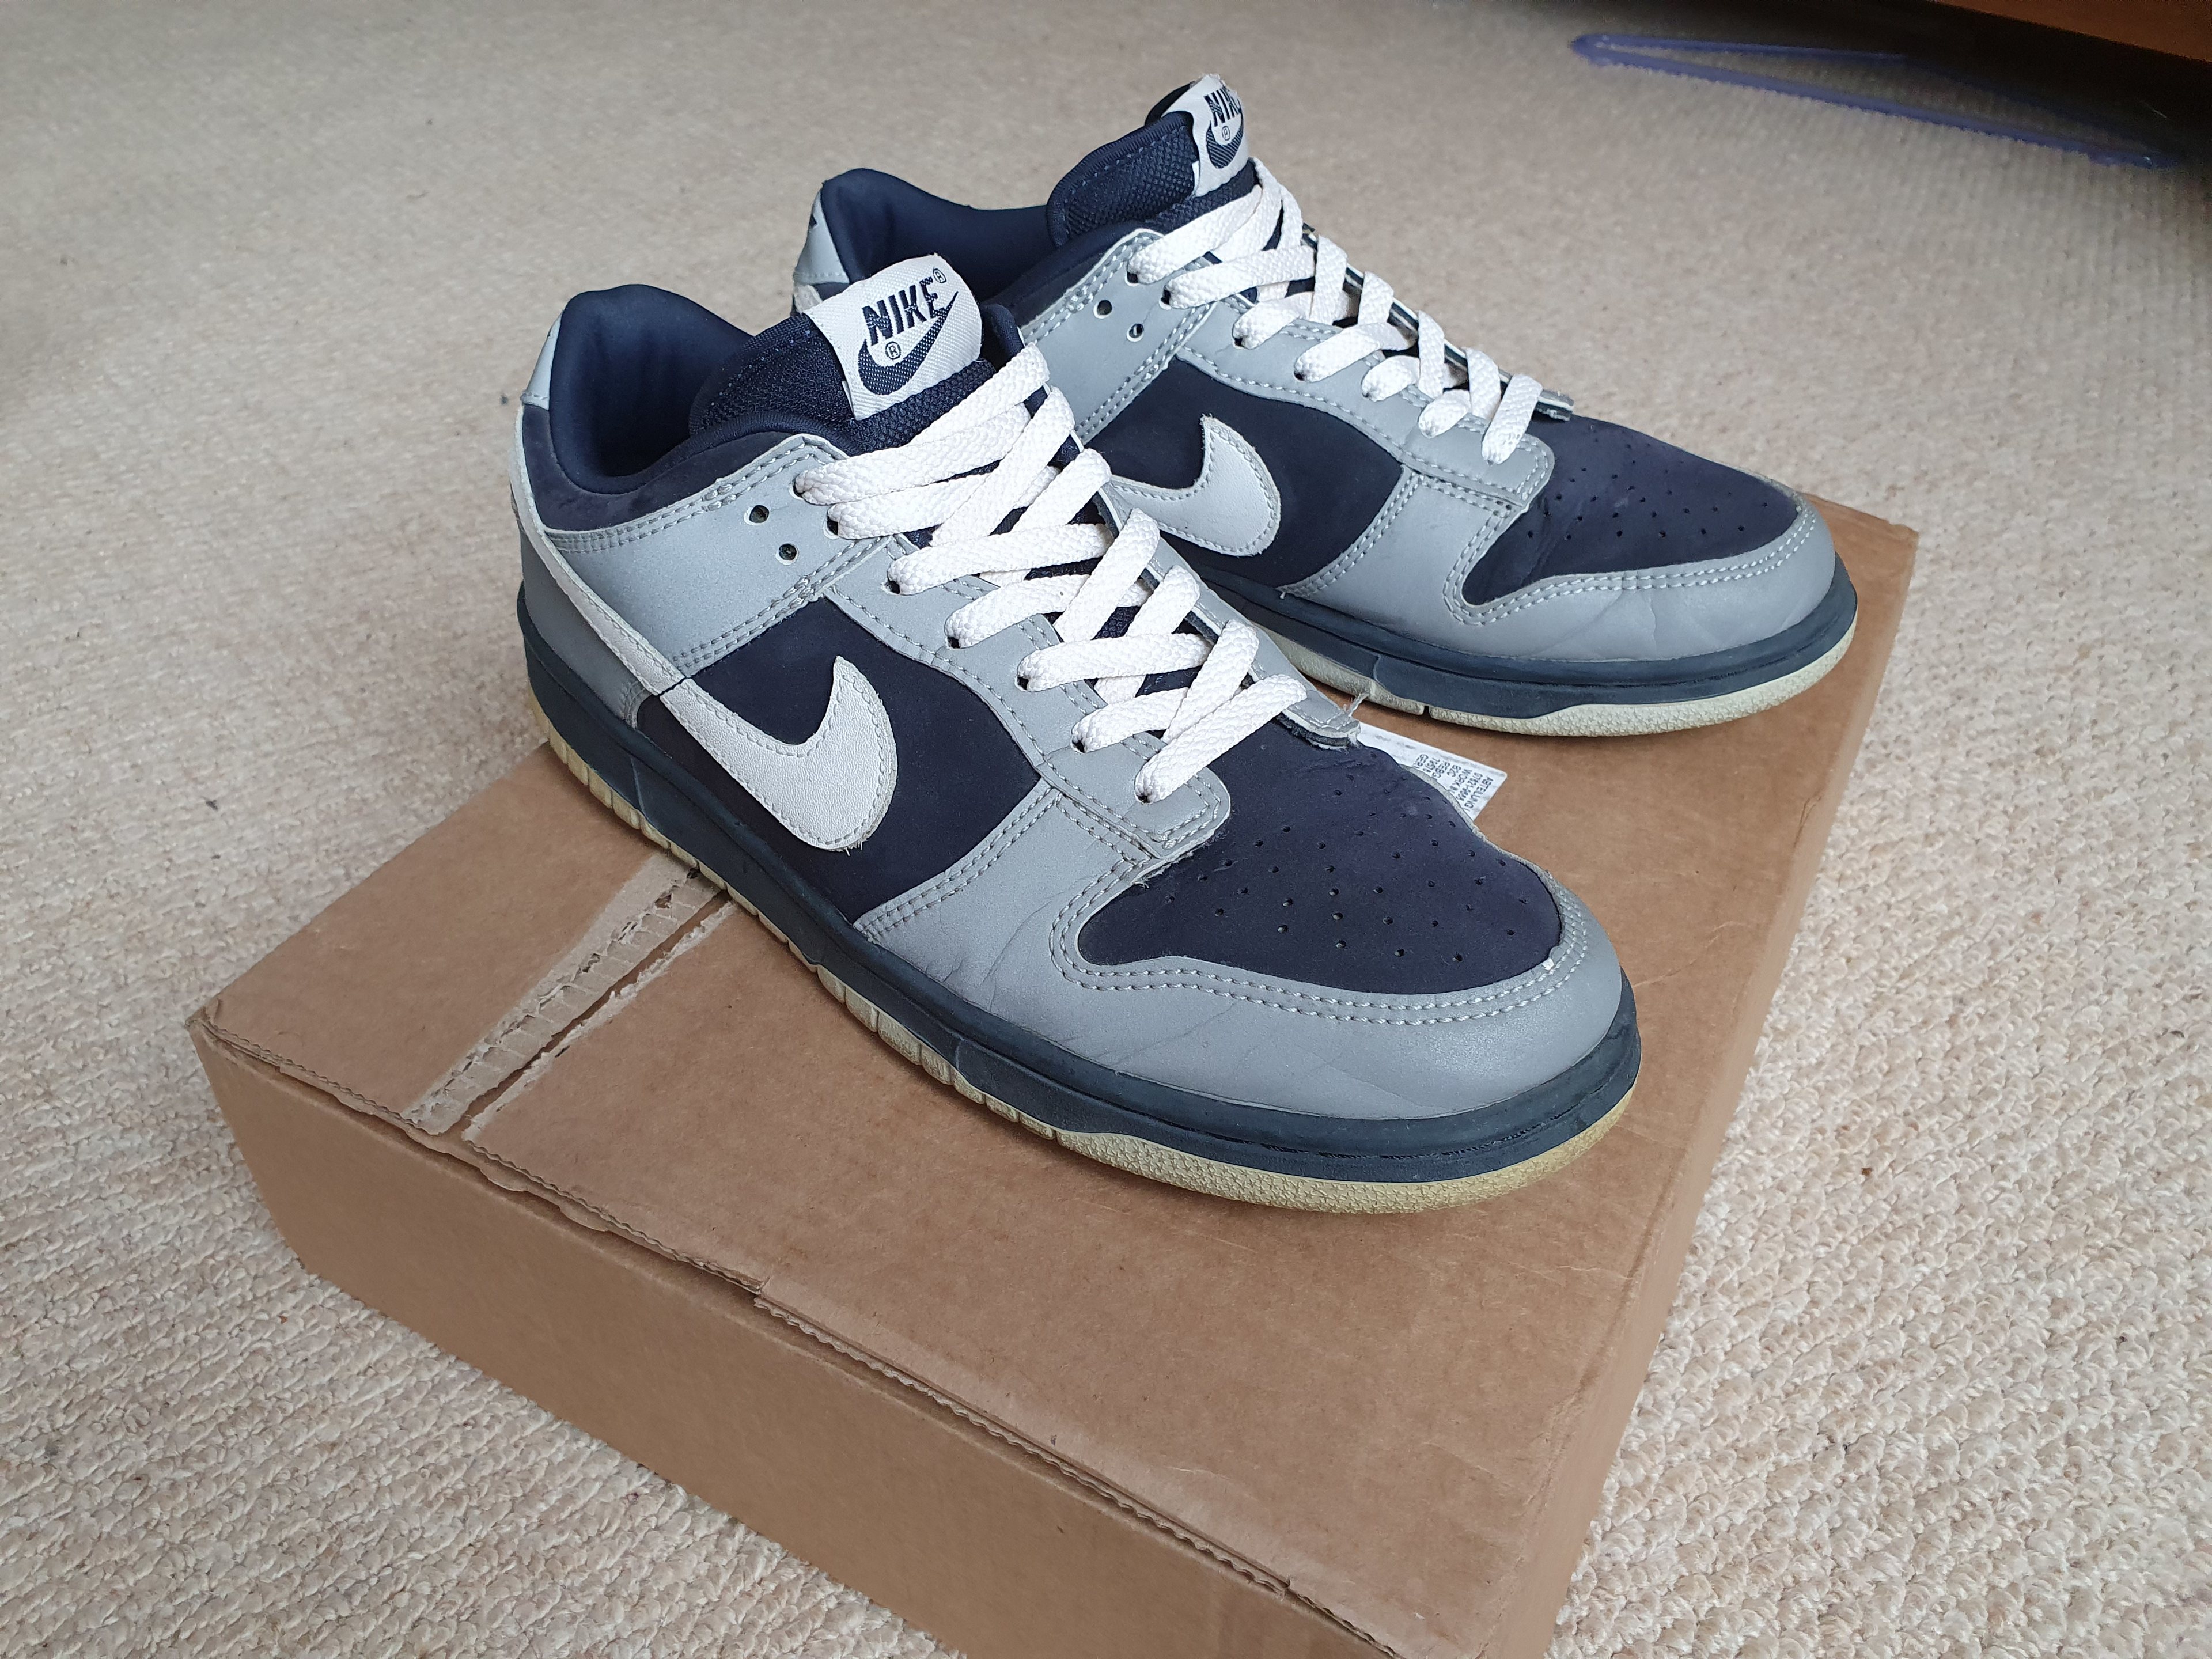 Anyone into trainers/sneakers? (Vol. 2) - Page 362 - The Lounge - PistonHeads